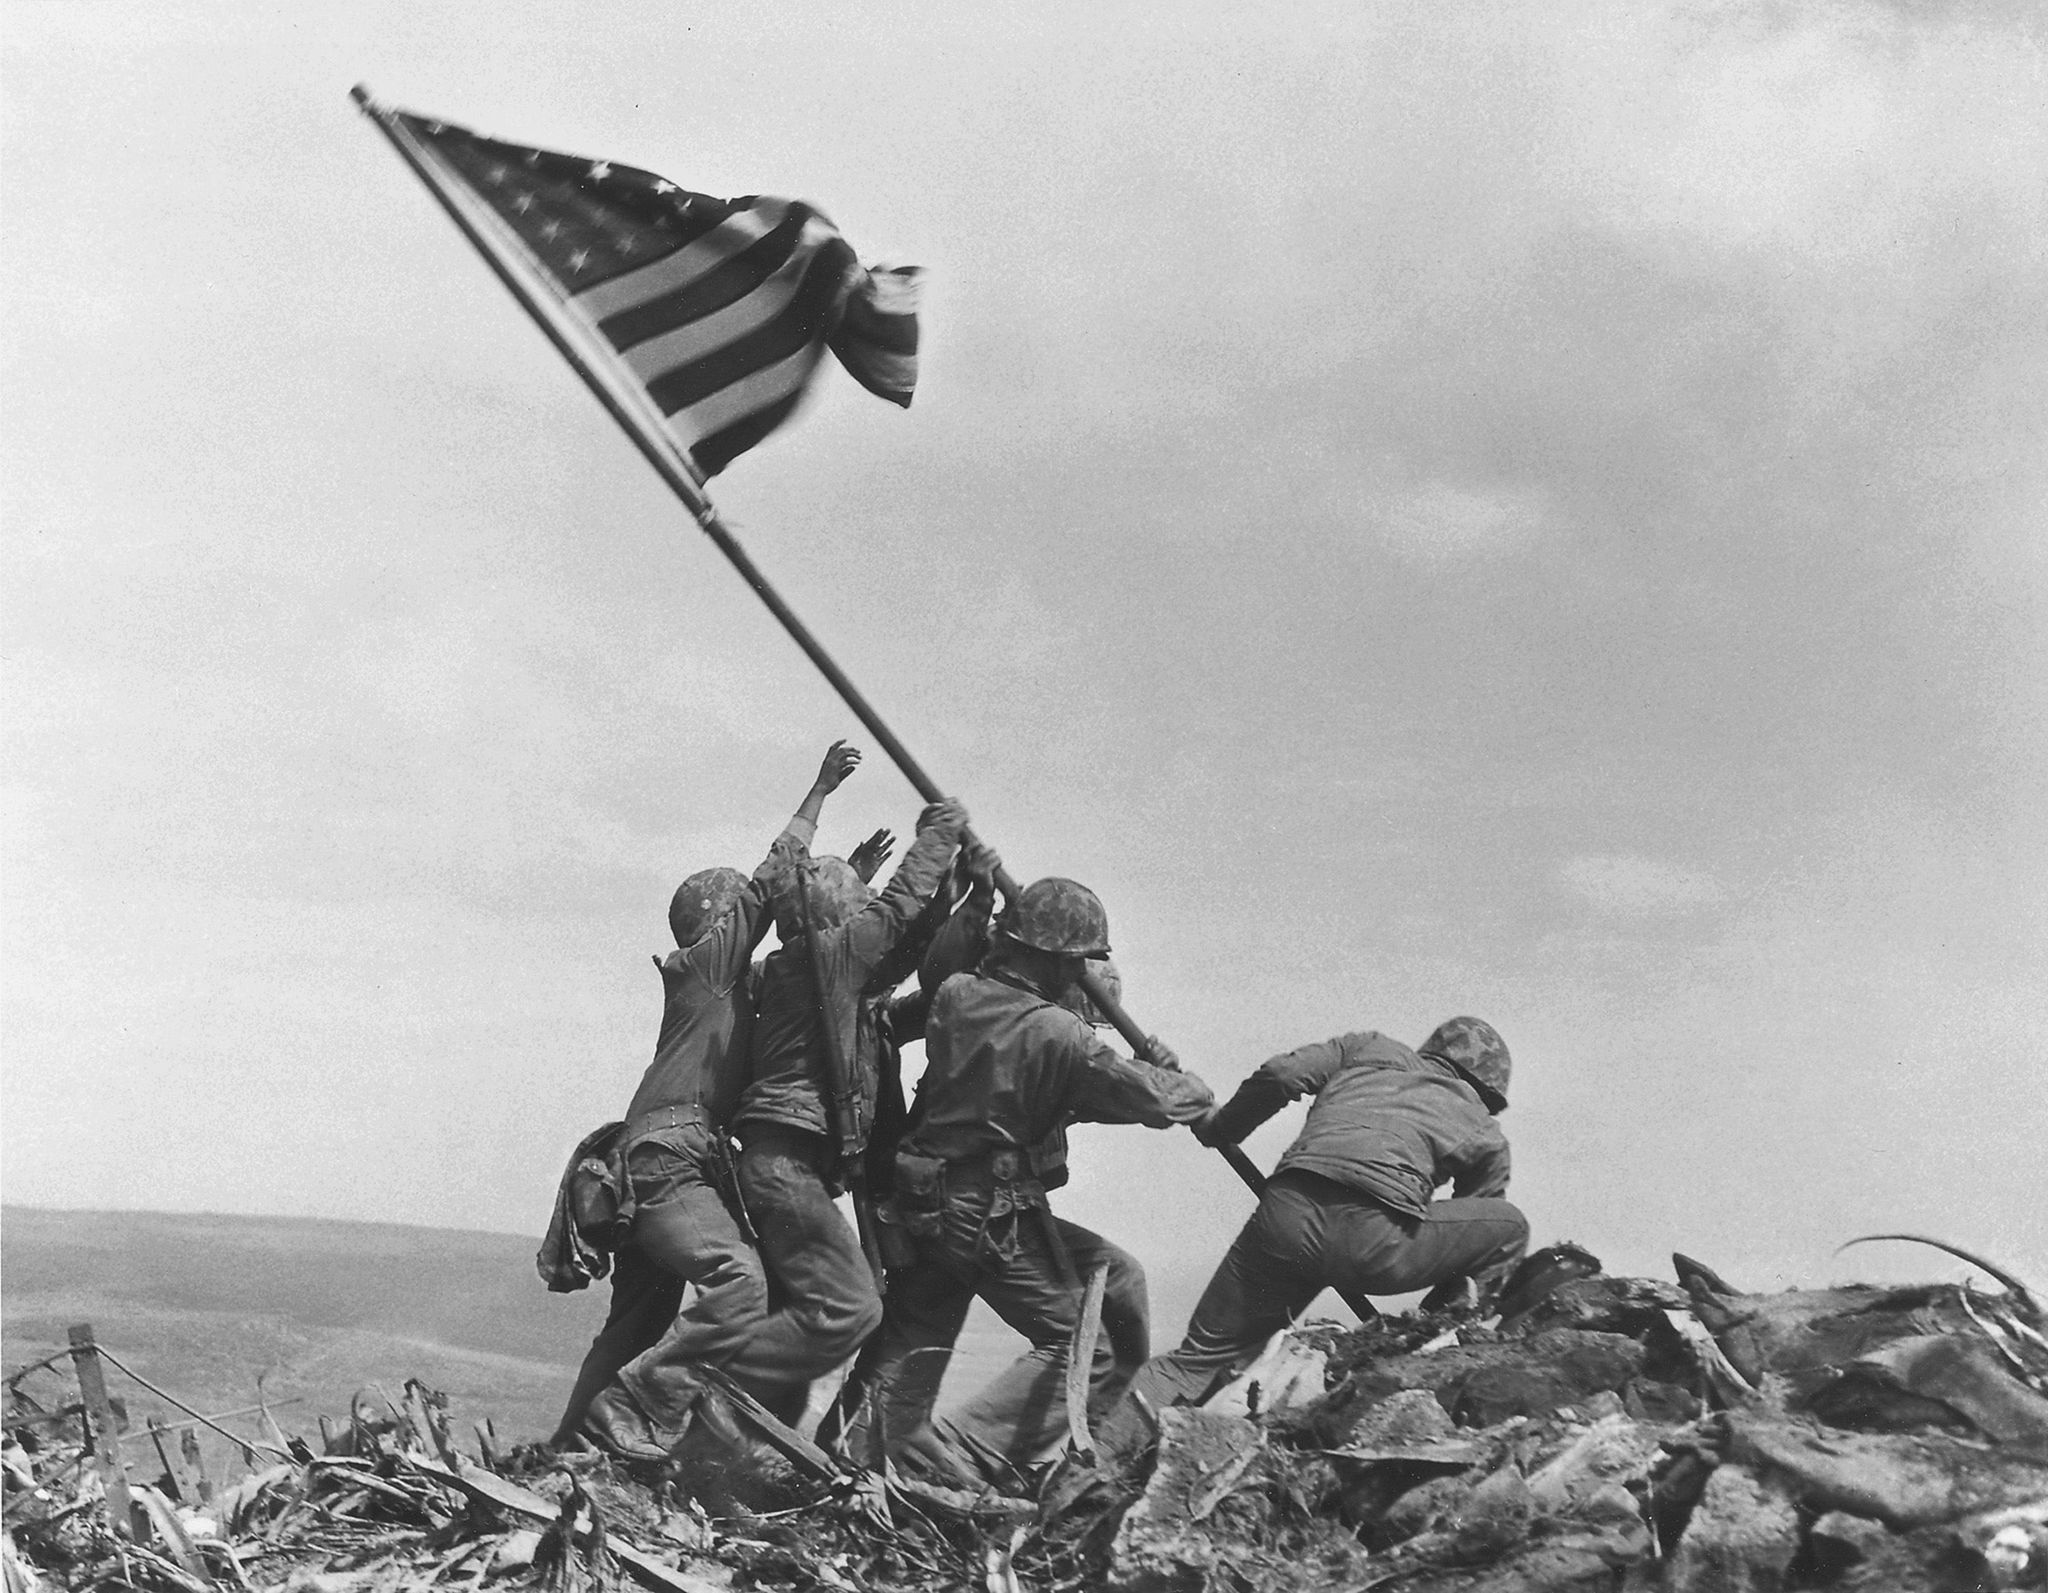 In this Feb 23, 1945, photo, U.S. Marines of the 28th Regiment, 5th Division, raise the American flag atop Mt. Suribachi, Iwo Jima, Japan. The Marines Corps announced Thursday that one of the six men long identified in the iconic World War II photograph was actually not in the image. A panel found that Private First Class Harold Schultz, of Detroit, was in the photo and that Navy Pharmacist’s Mate 2nd Class John Bradley wasn’t in the image. Bradley had participated in an earlier flag-raising on Mount Suribachi.